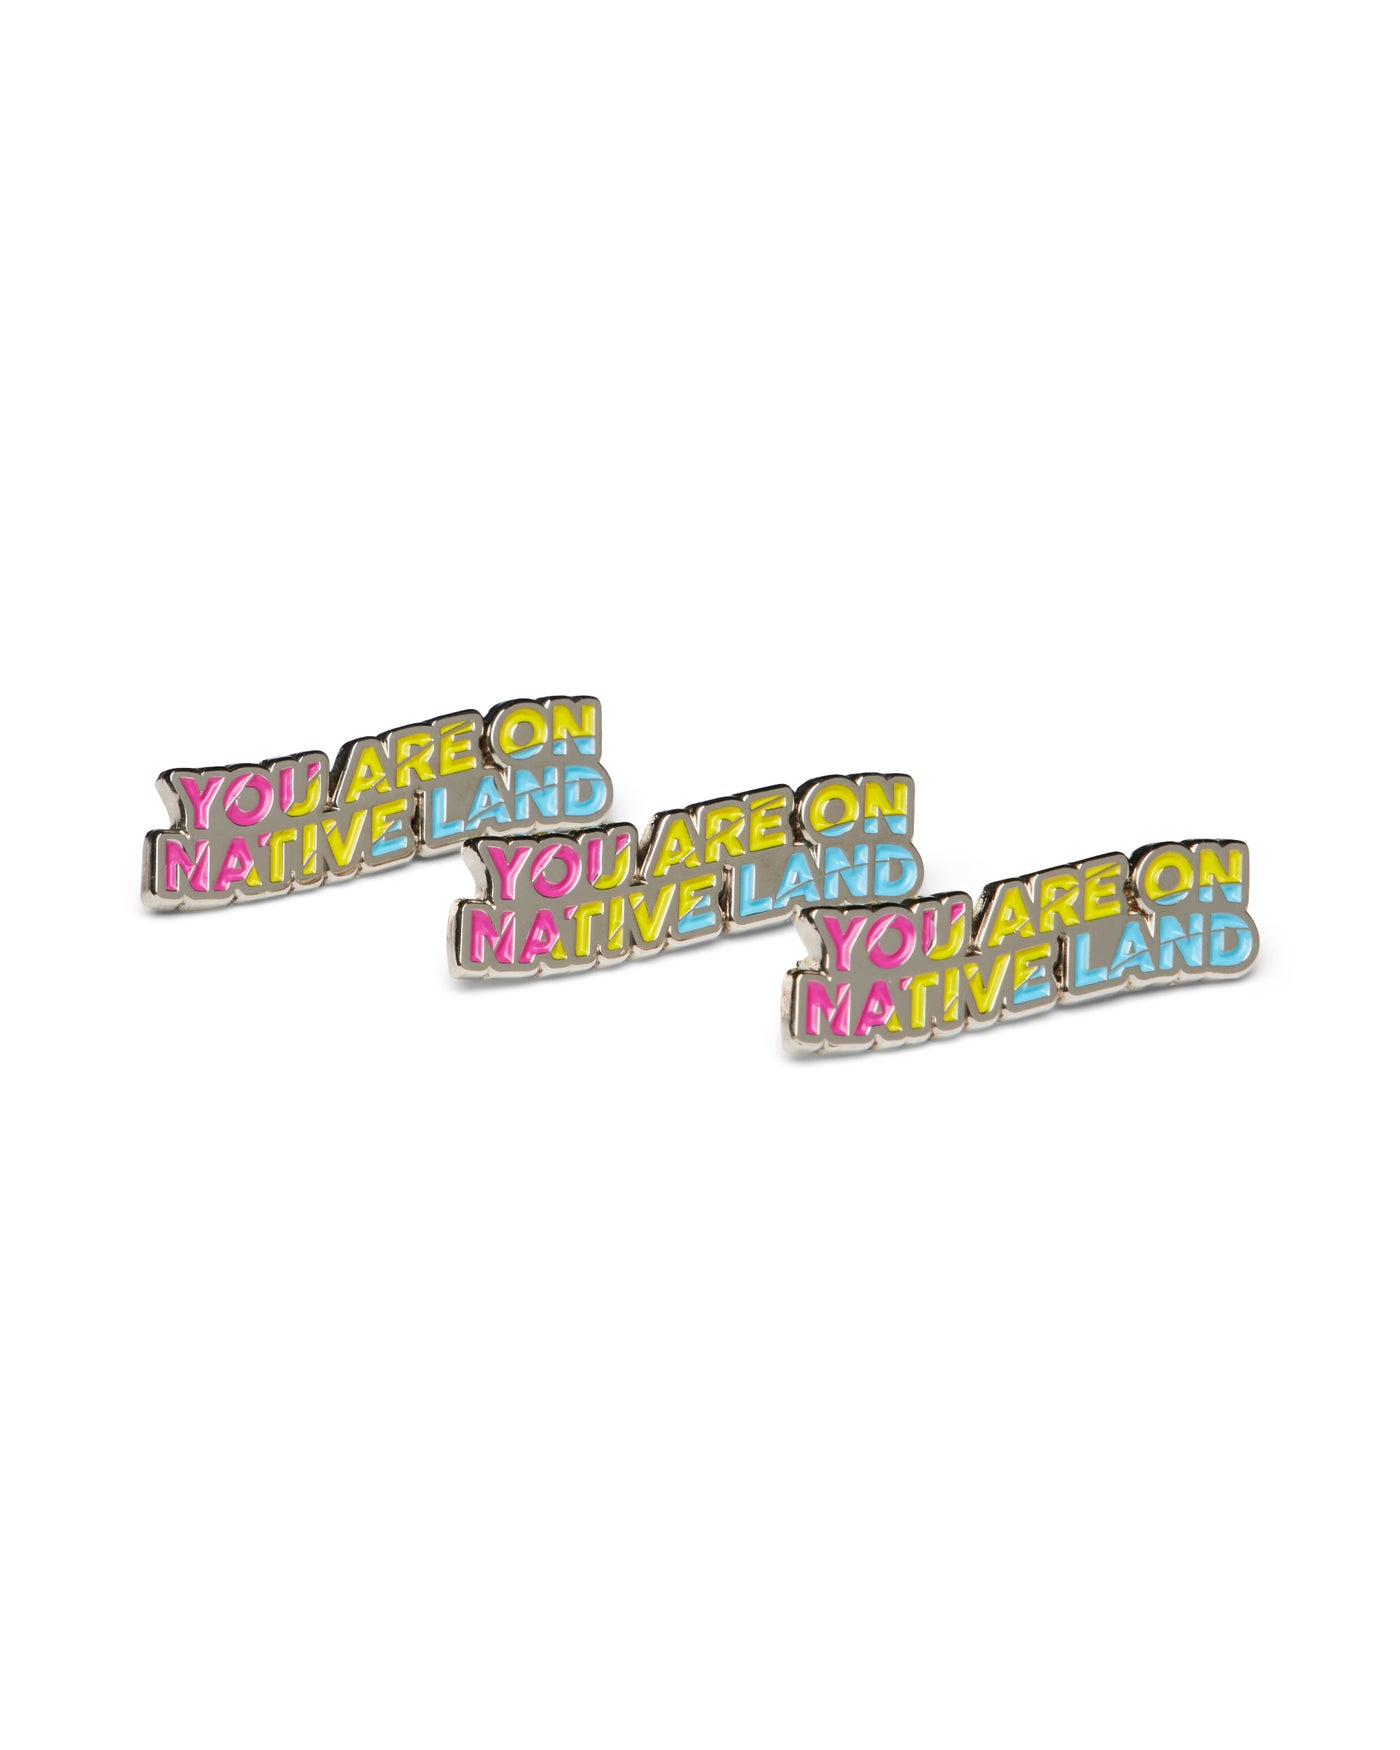 'YOU ARE ON NATIVE LAND' PRIDE PIN - PANSEXUAL FLAG